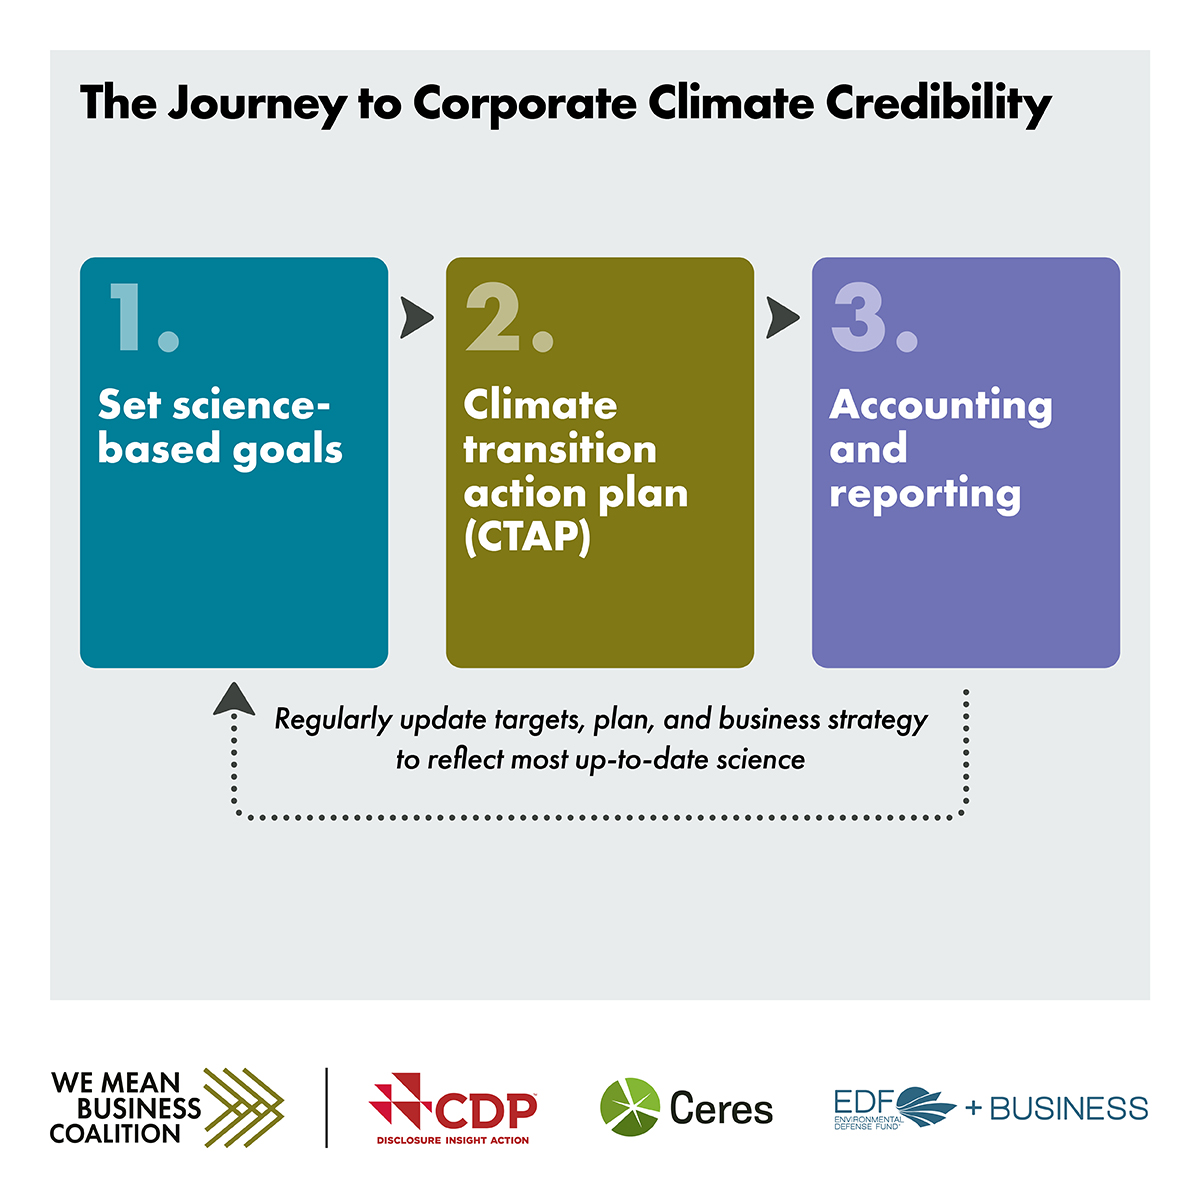 Corporate commitments for net zero by 2050 rely on climate transition action plans from 2023. But not enough companies are creating and disclosing credible CTAPs. ⬇️ wemeanbusinesscoalition.org/blog/corporate…